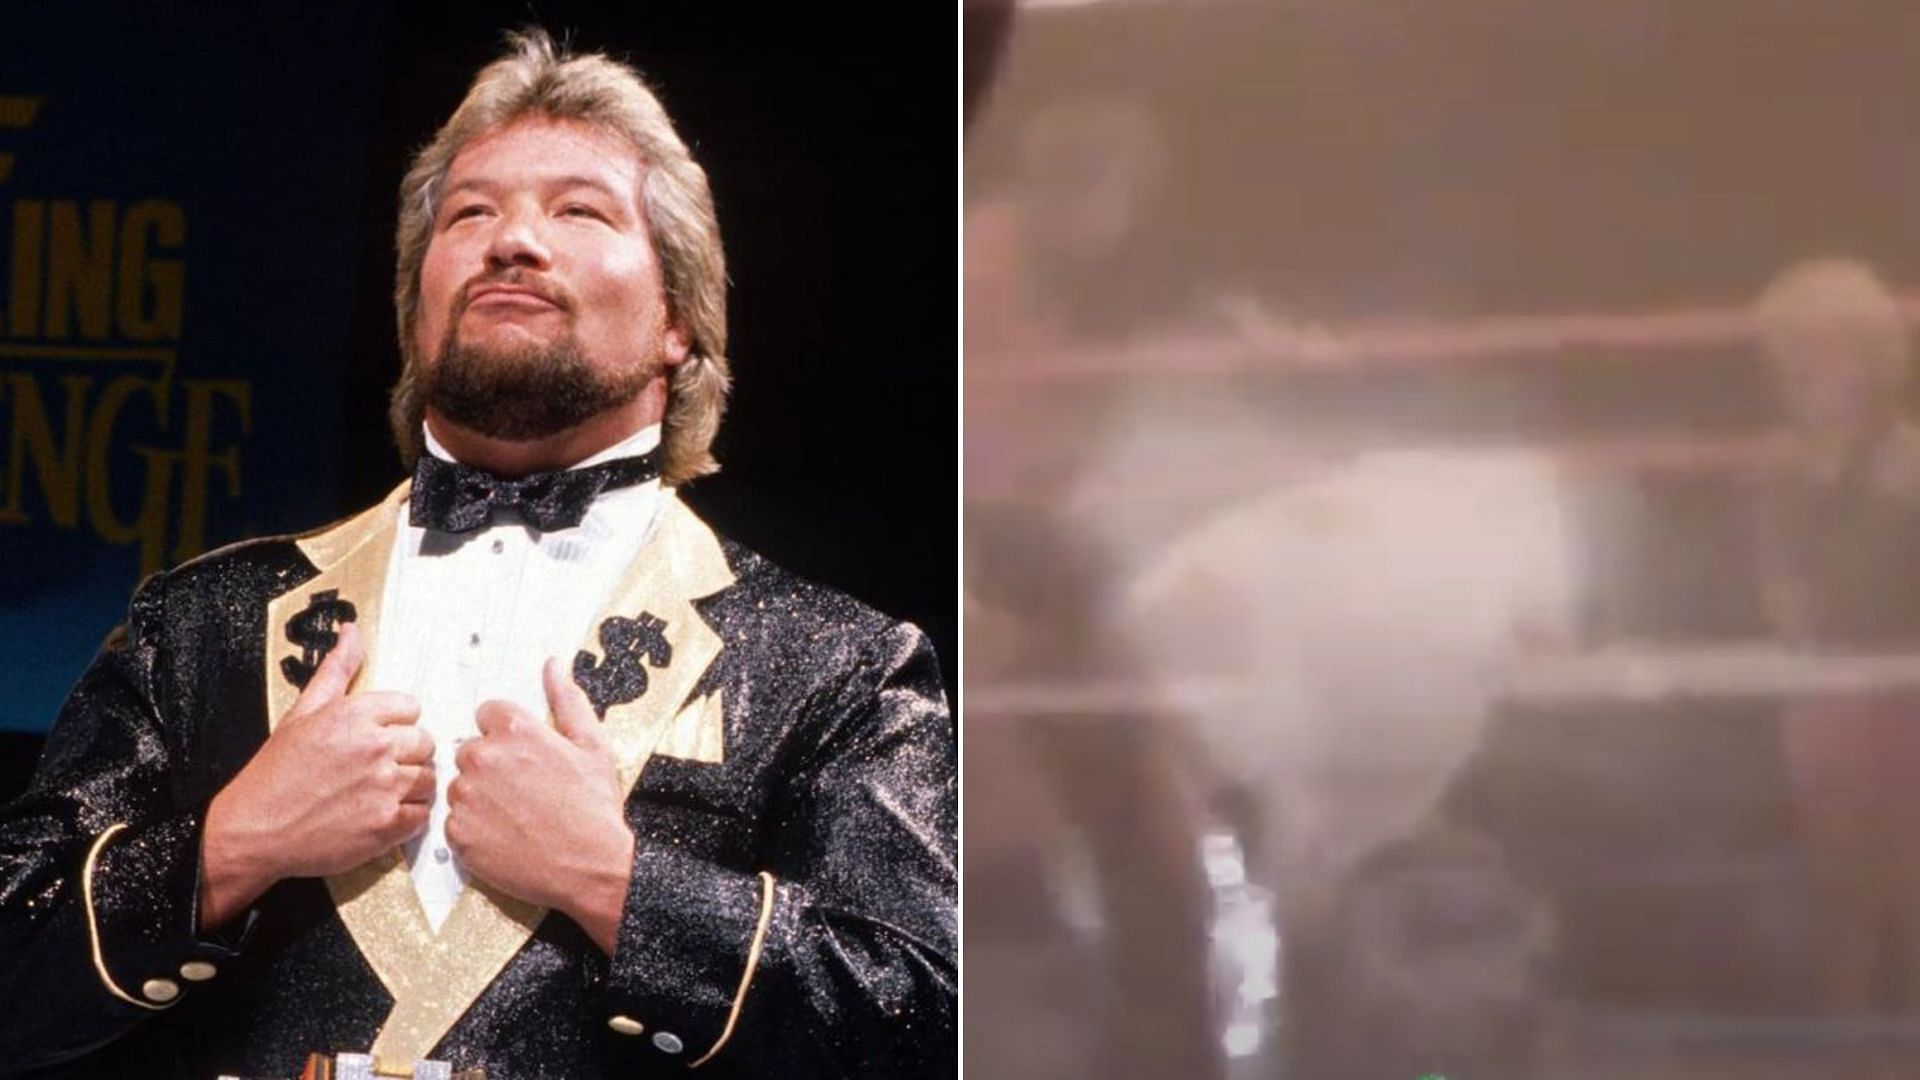 A WWE fan recalled an incredible story about meeting Ted DiBiase in 1987